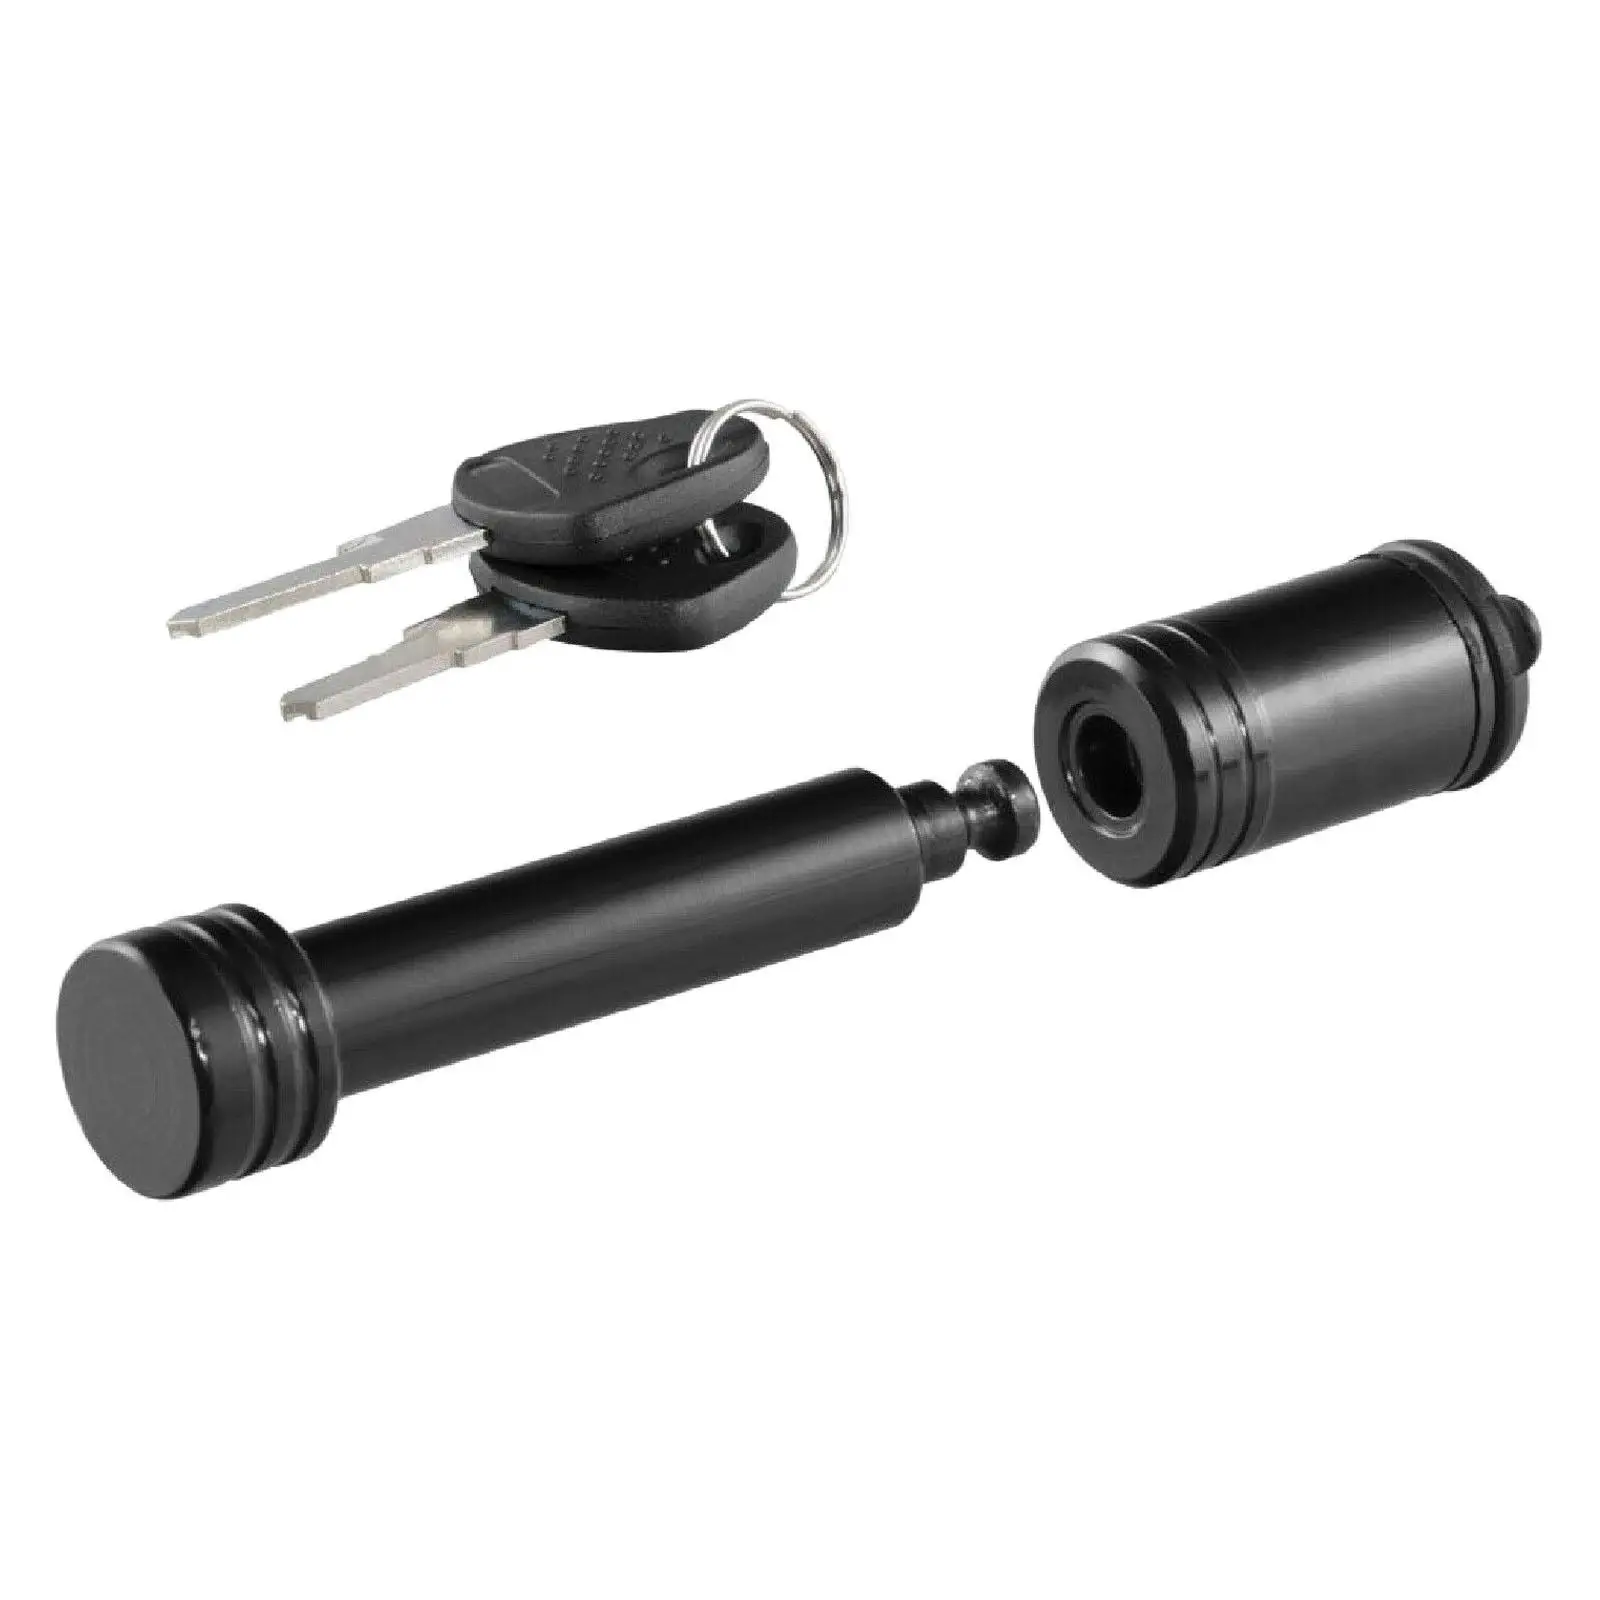 Trailer Hitch Lock 5/8-Inch Pin Diameter W/Keys Accessories Fit for 2-Inch Receiver